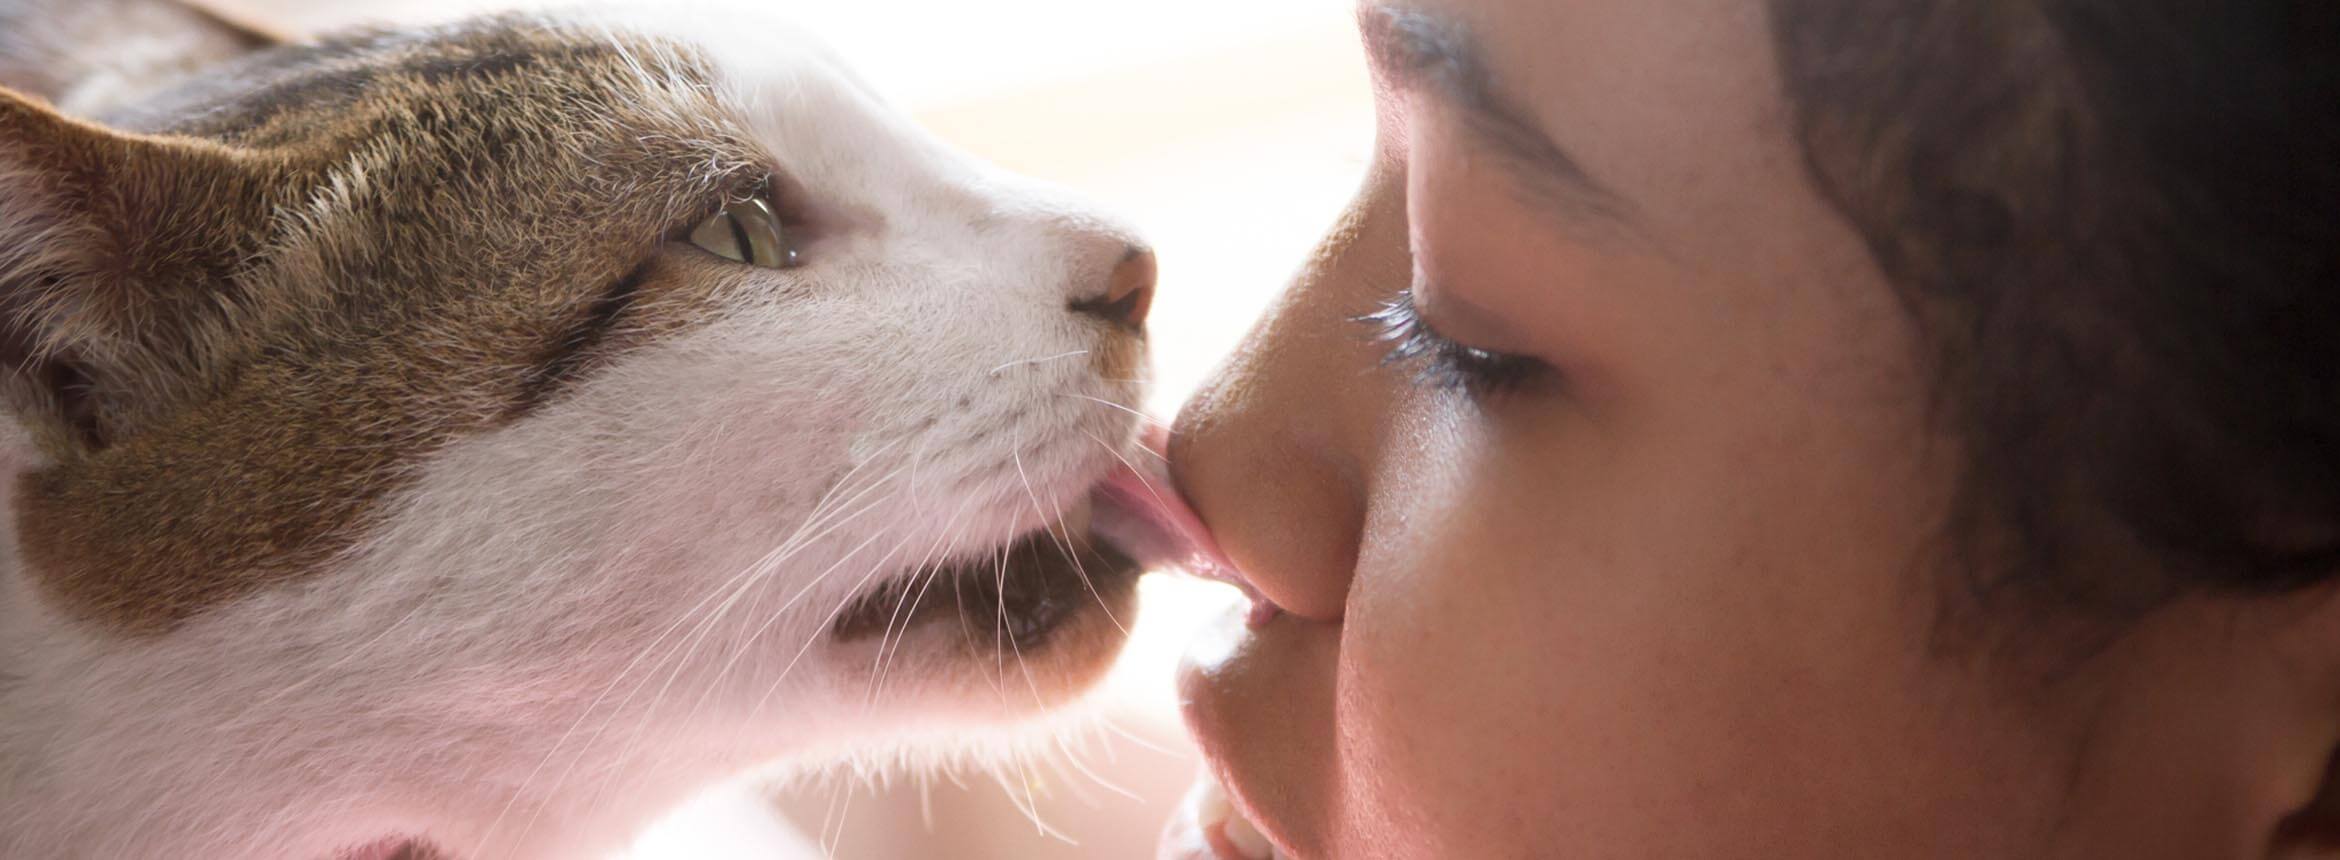 image of a cat licking it's owner